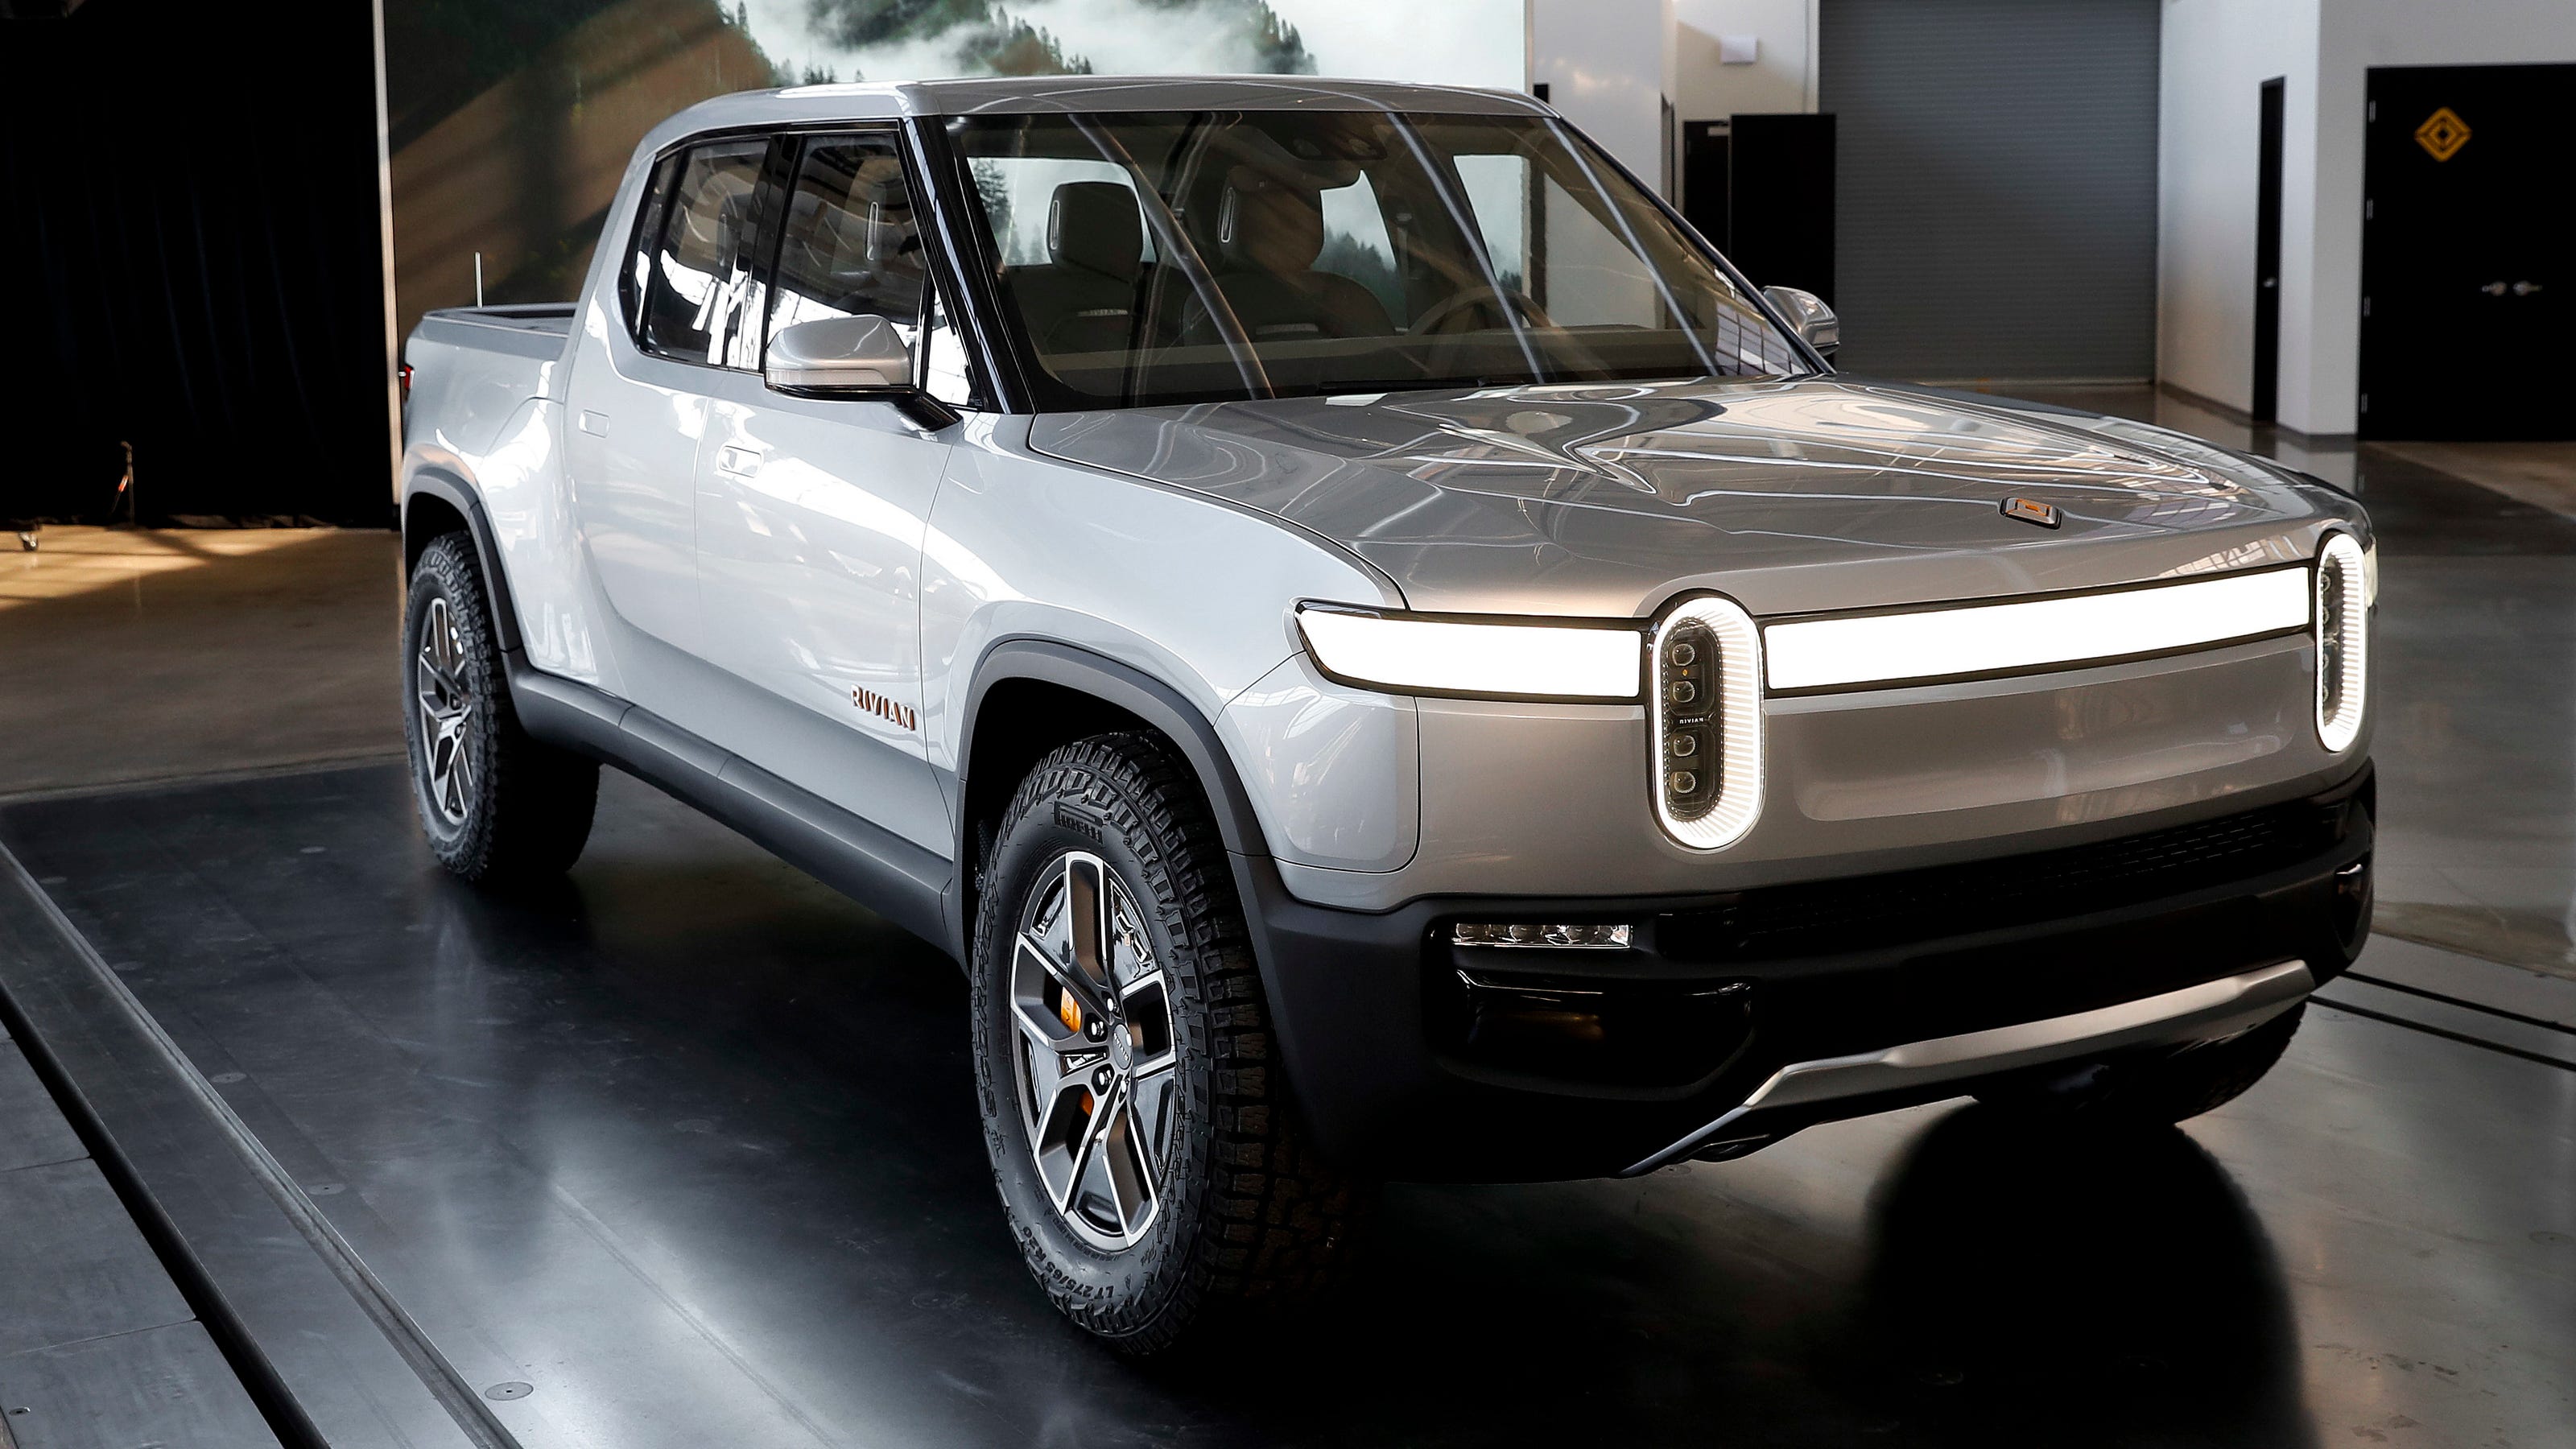 Rivian's electric truck aims to be Michigan's Teslafighter